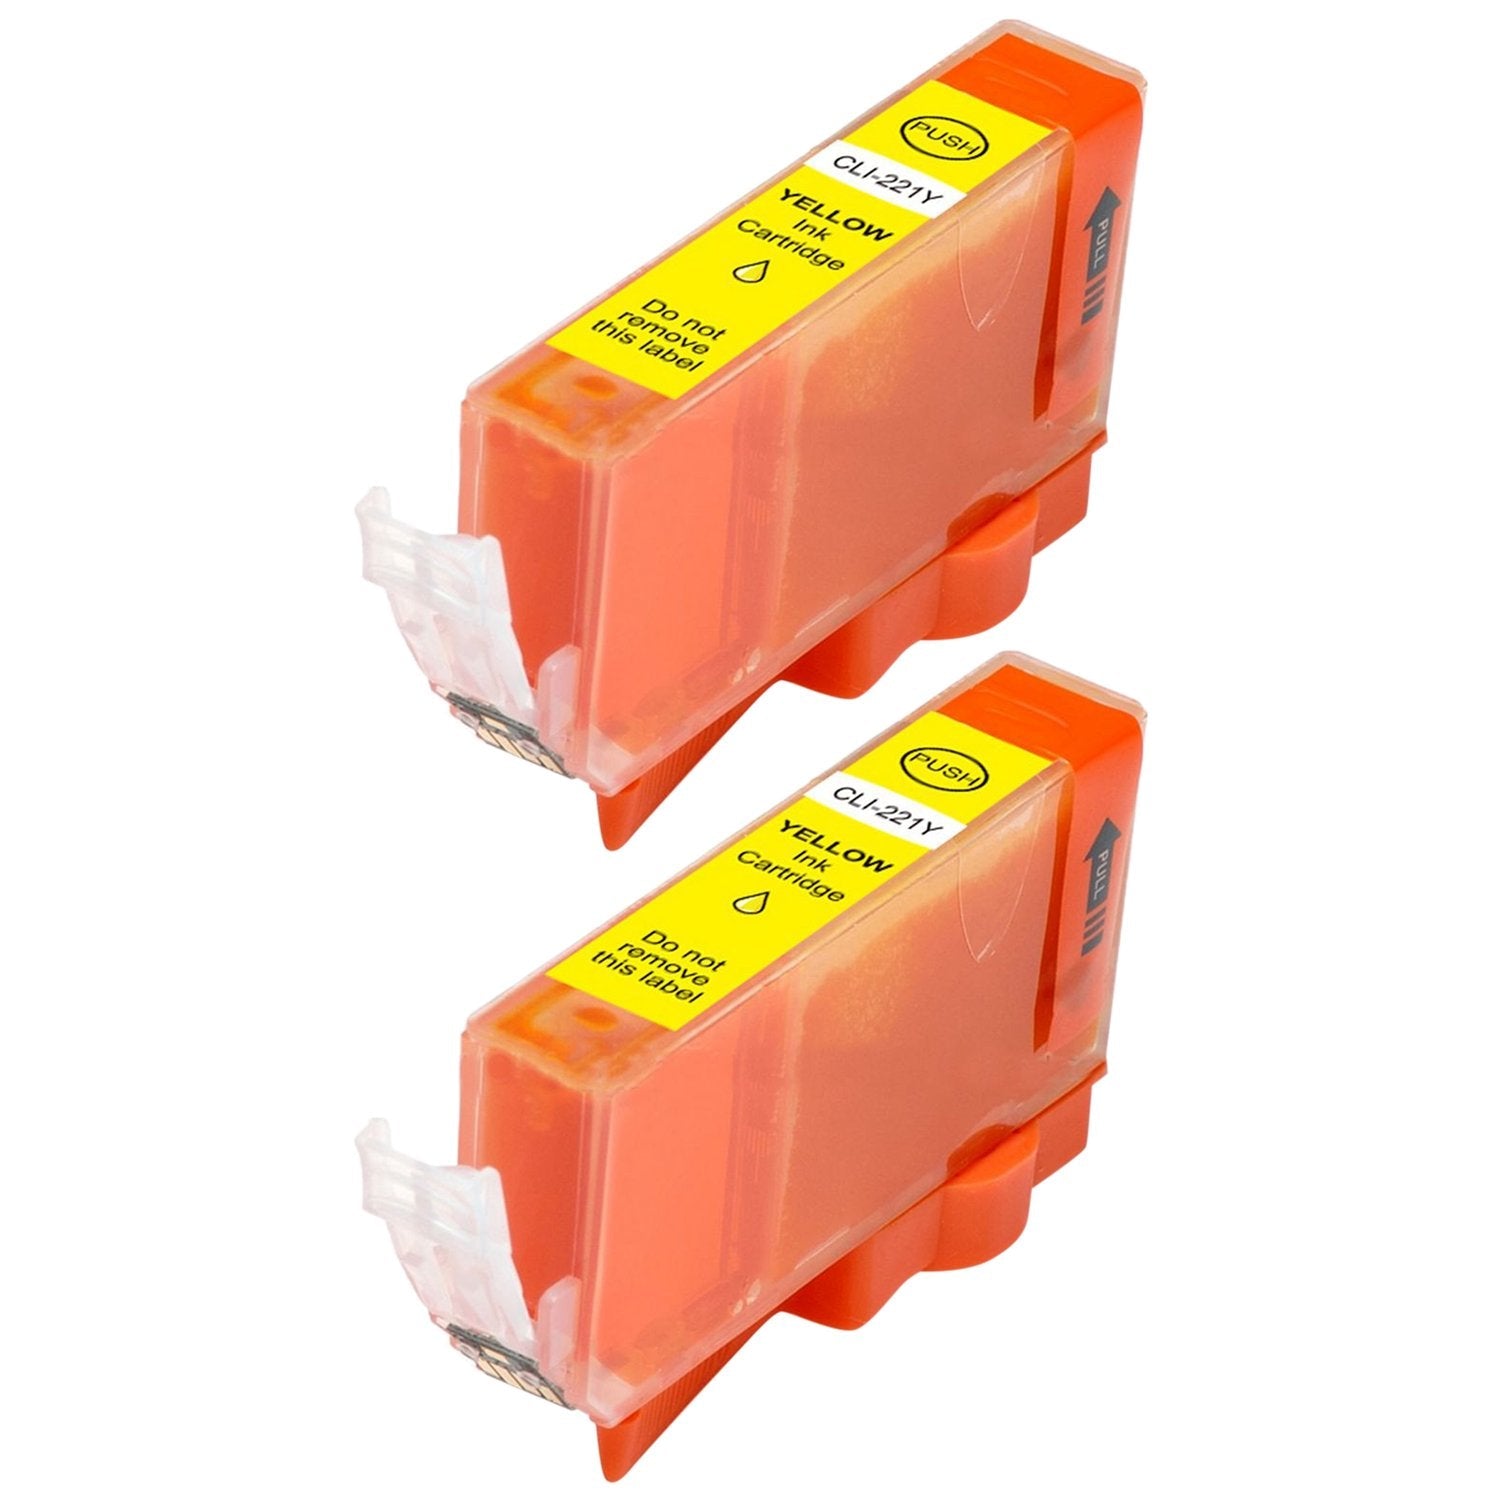 Absolute Toner Canon CLI-221Y (2949B001) Compatible Ink Cartridges Yellow | Absolute Toner Canon Ink Cartridges